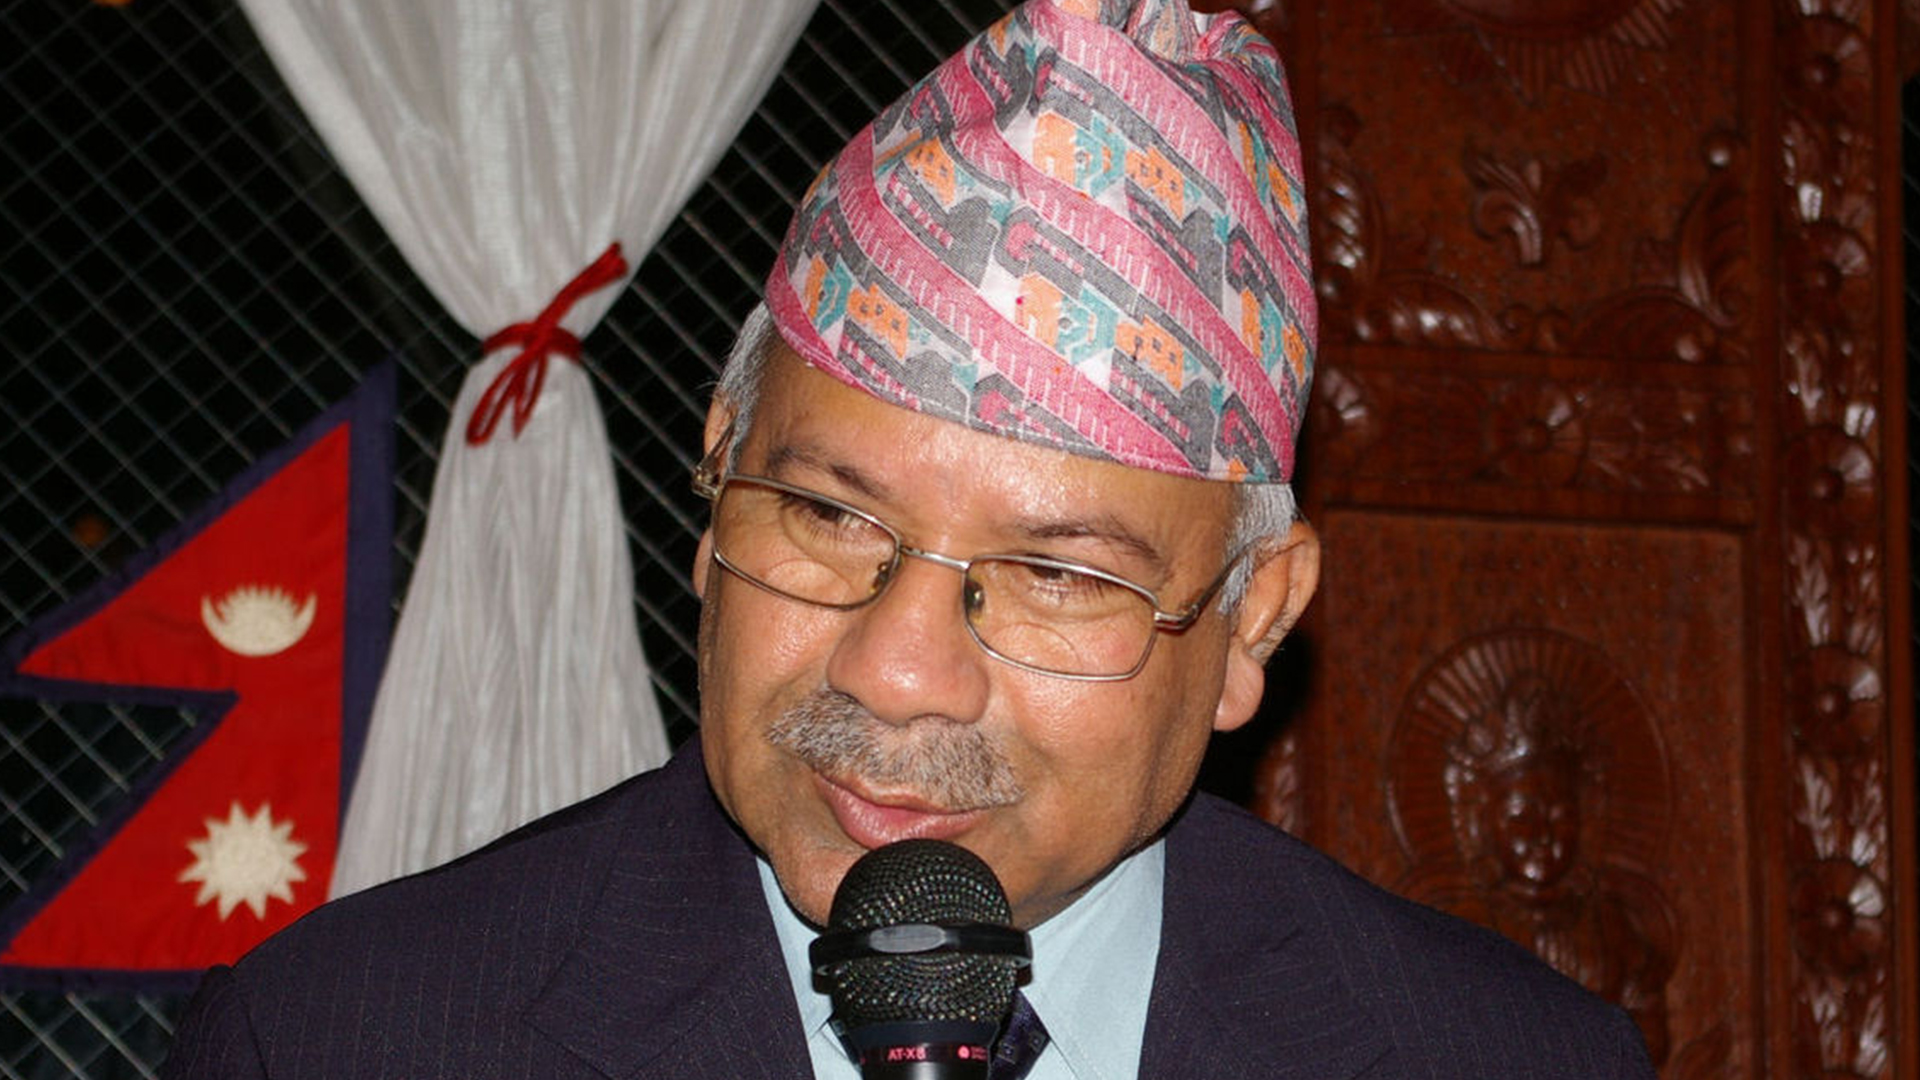 Accused Prime Minister Oli of trampling on the values ​​of democracy: Chairman Nepal